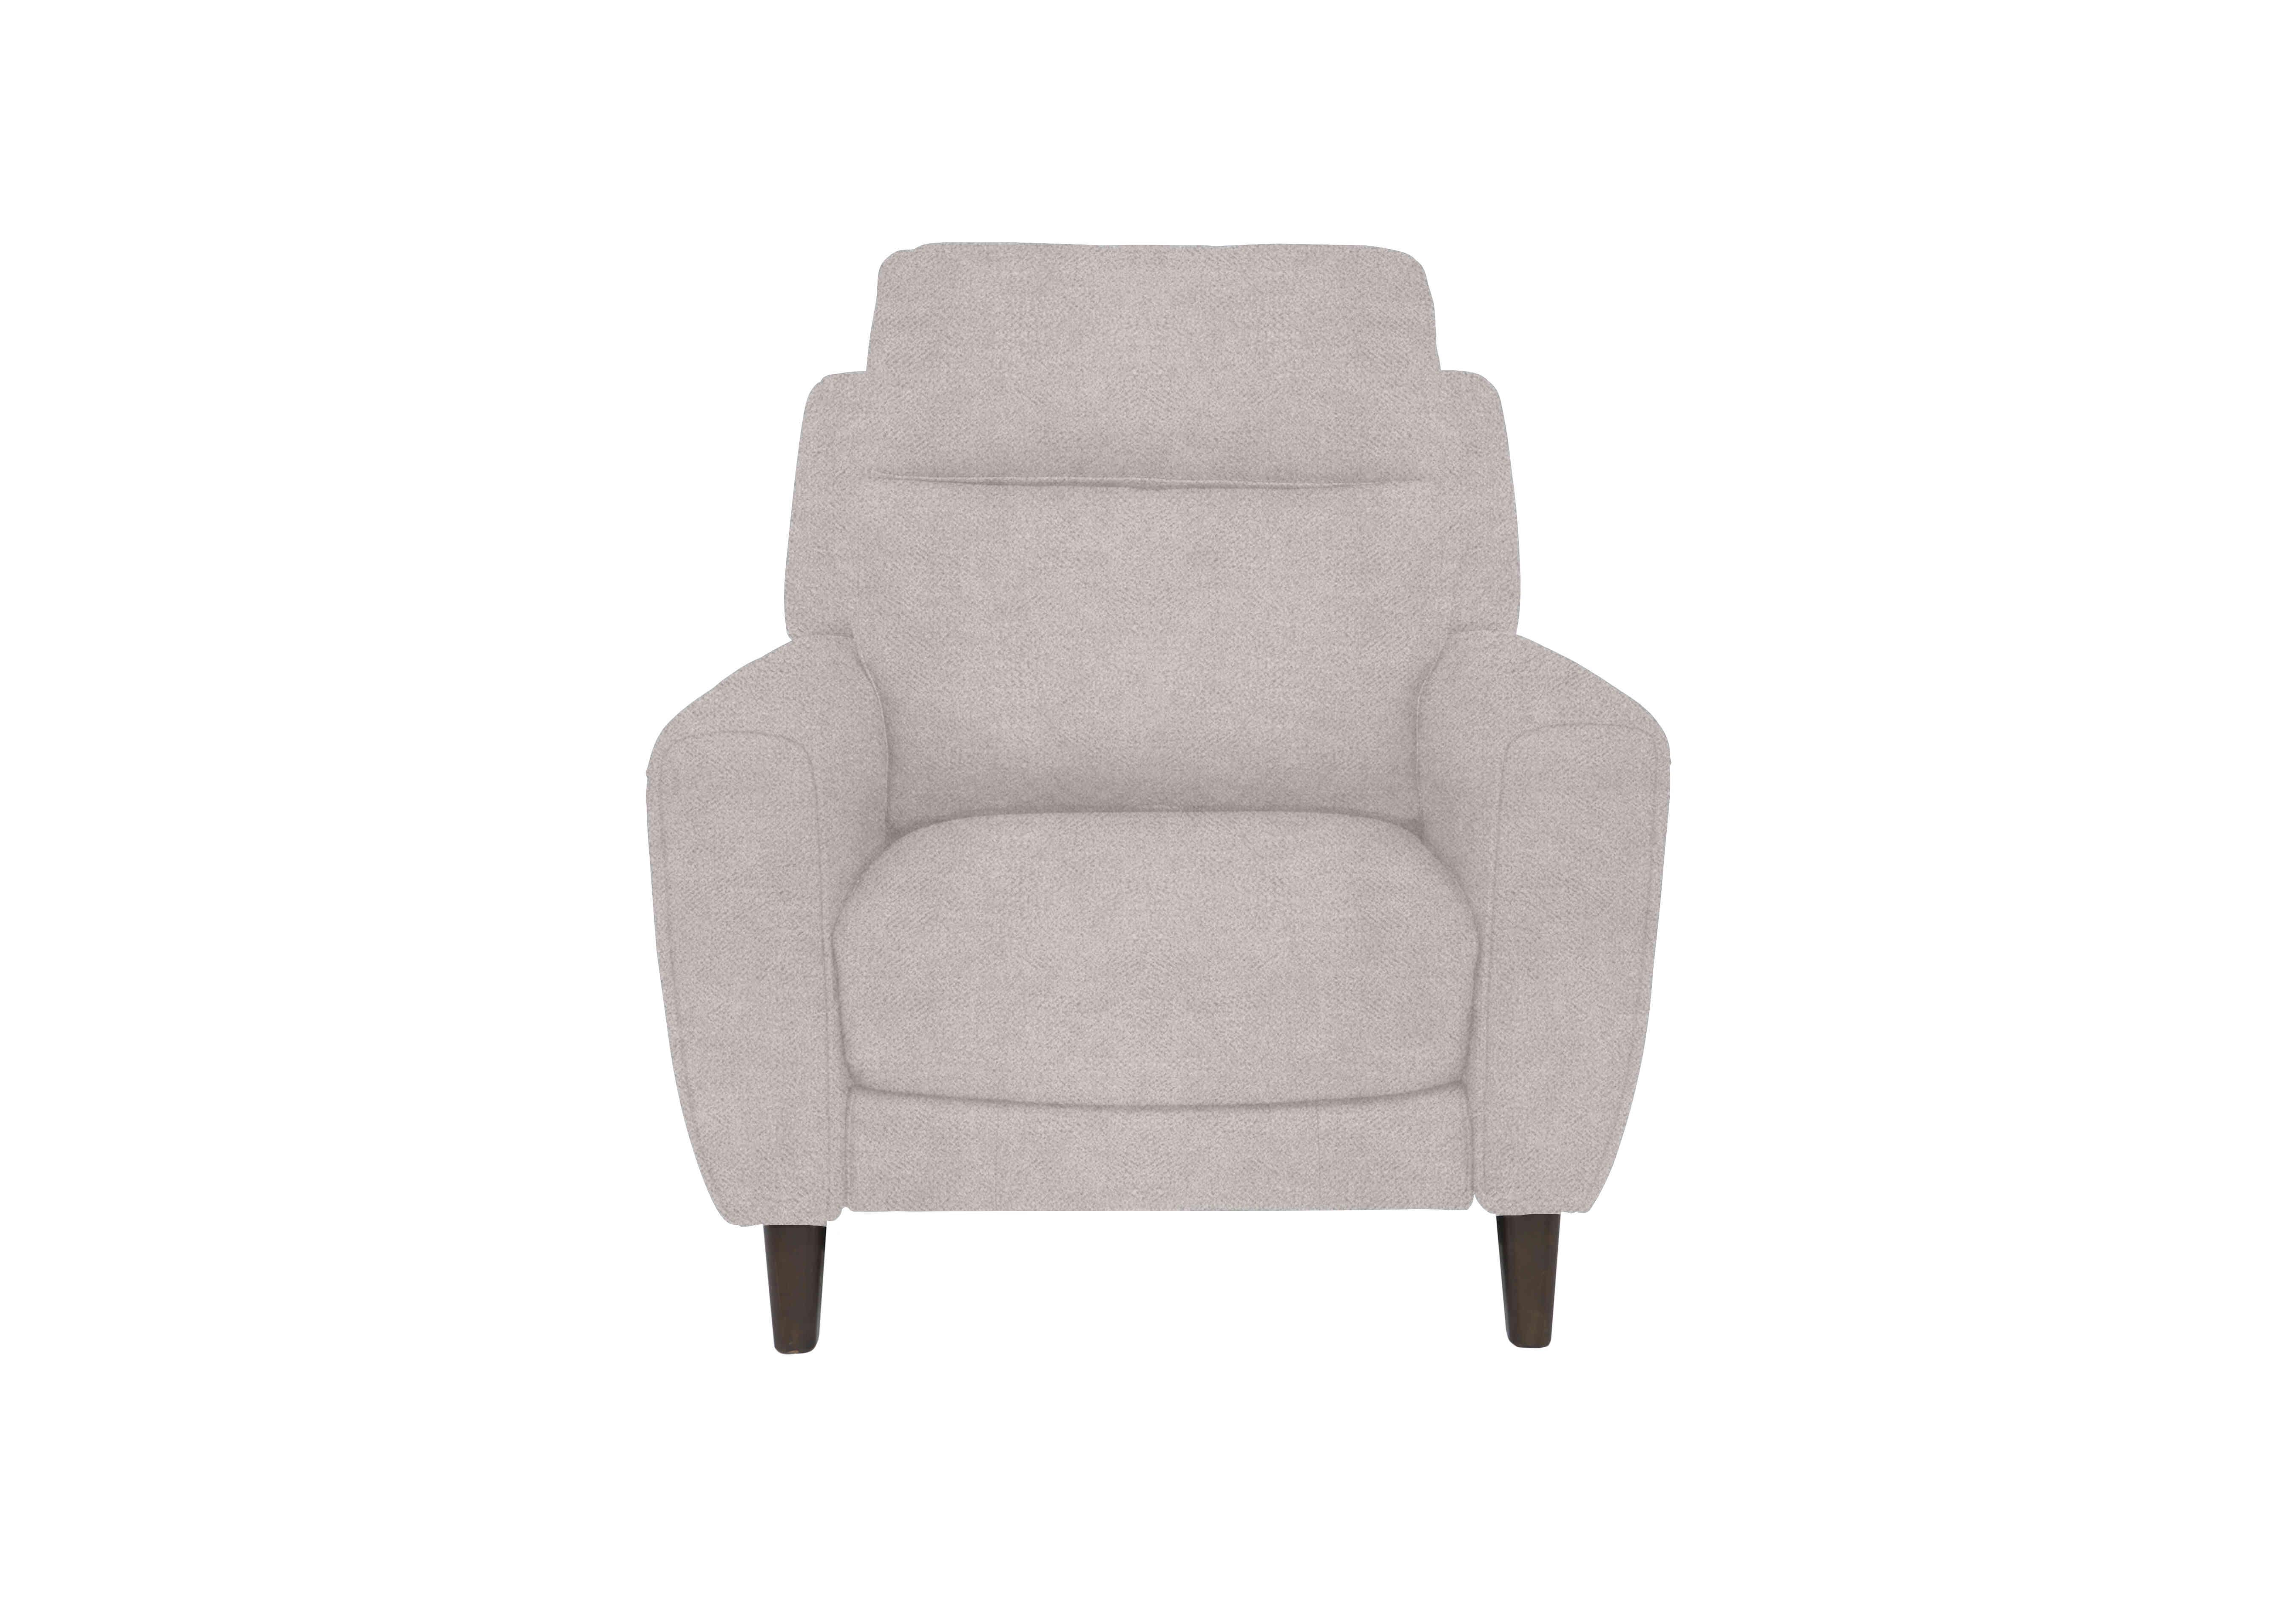 Zen Fabric Chair in Fab-Meo-R23 Silver Grey on Furniture Village